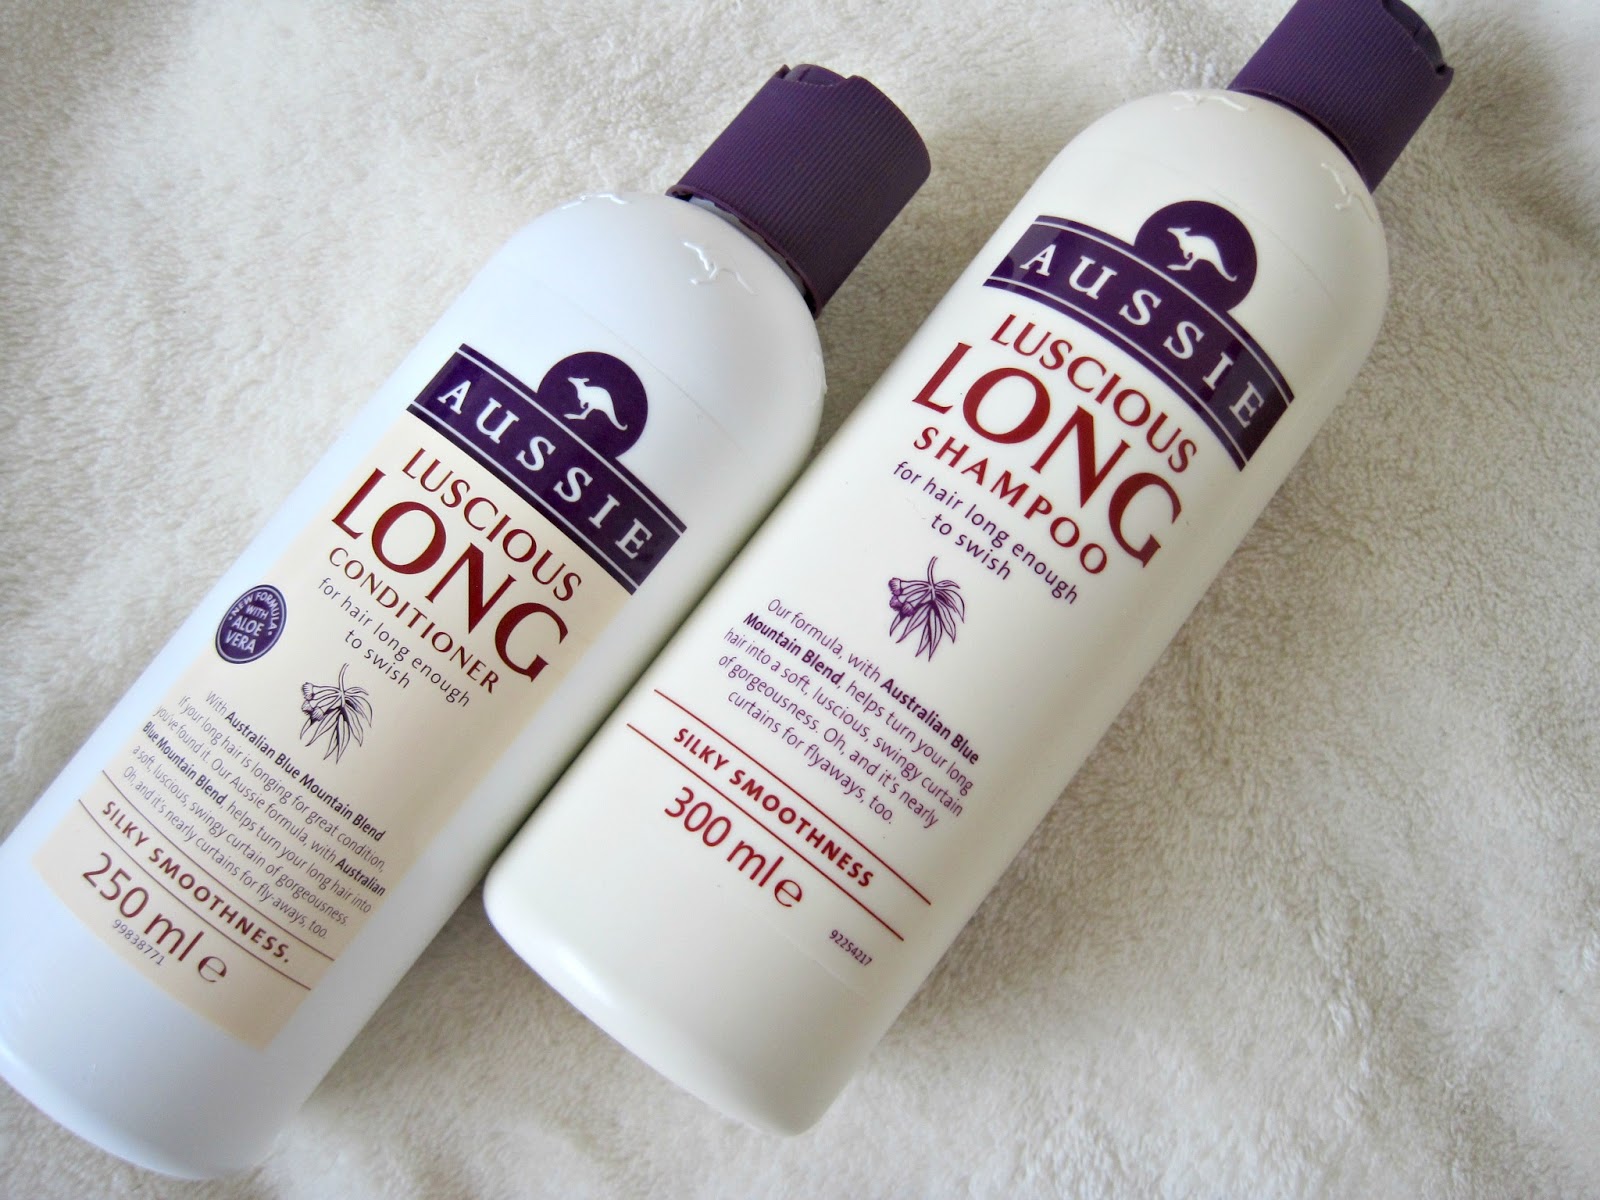 vente sjæl Ithaca The Treasure Chest: Aussie Luscious Long Shampoo and Conditioner Review